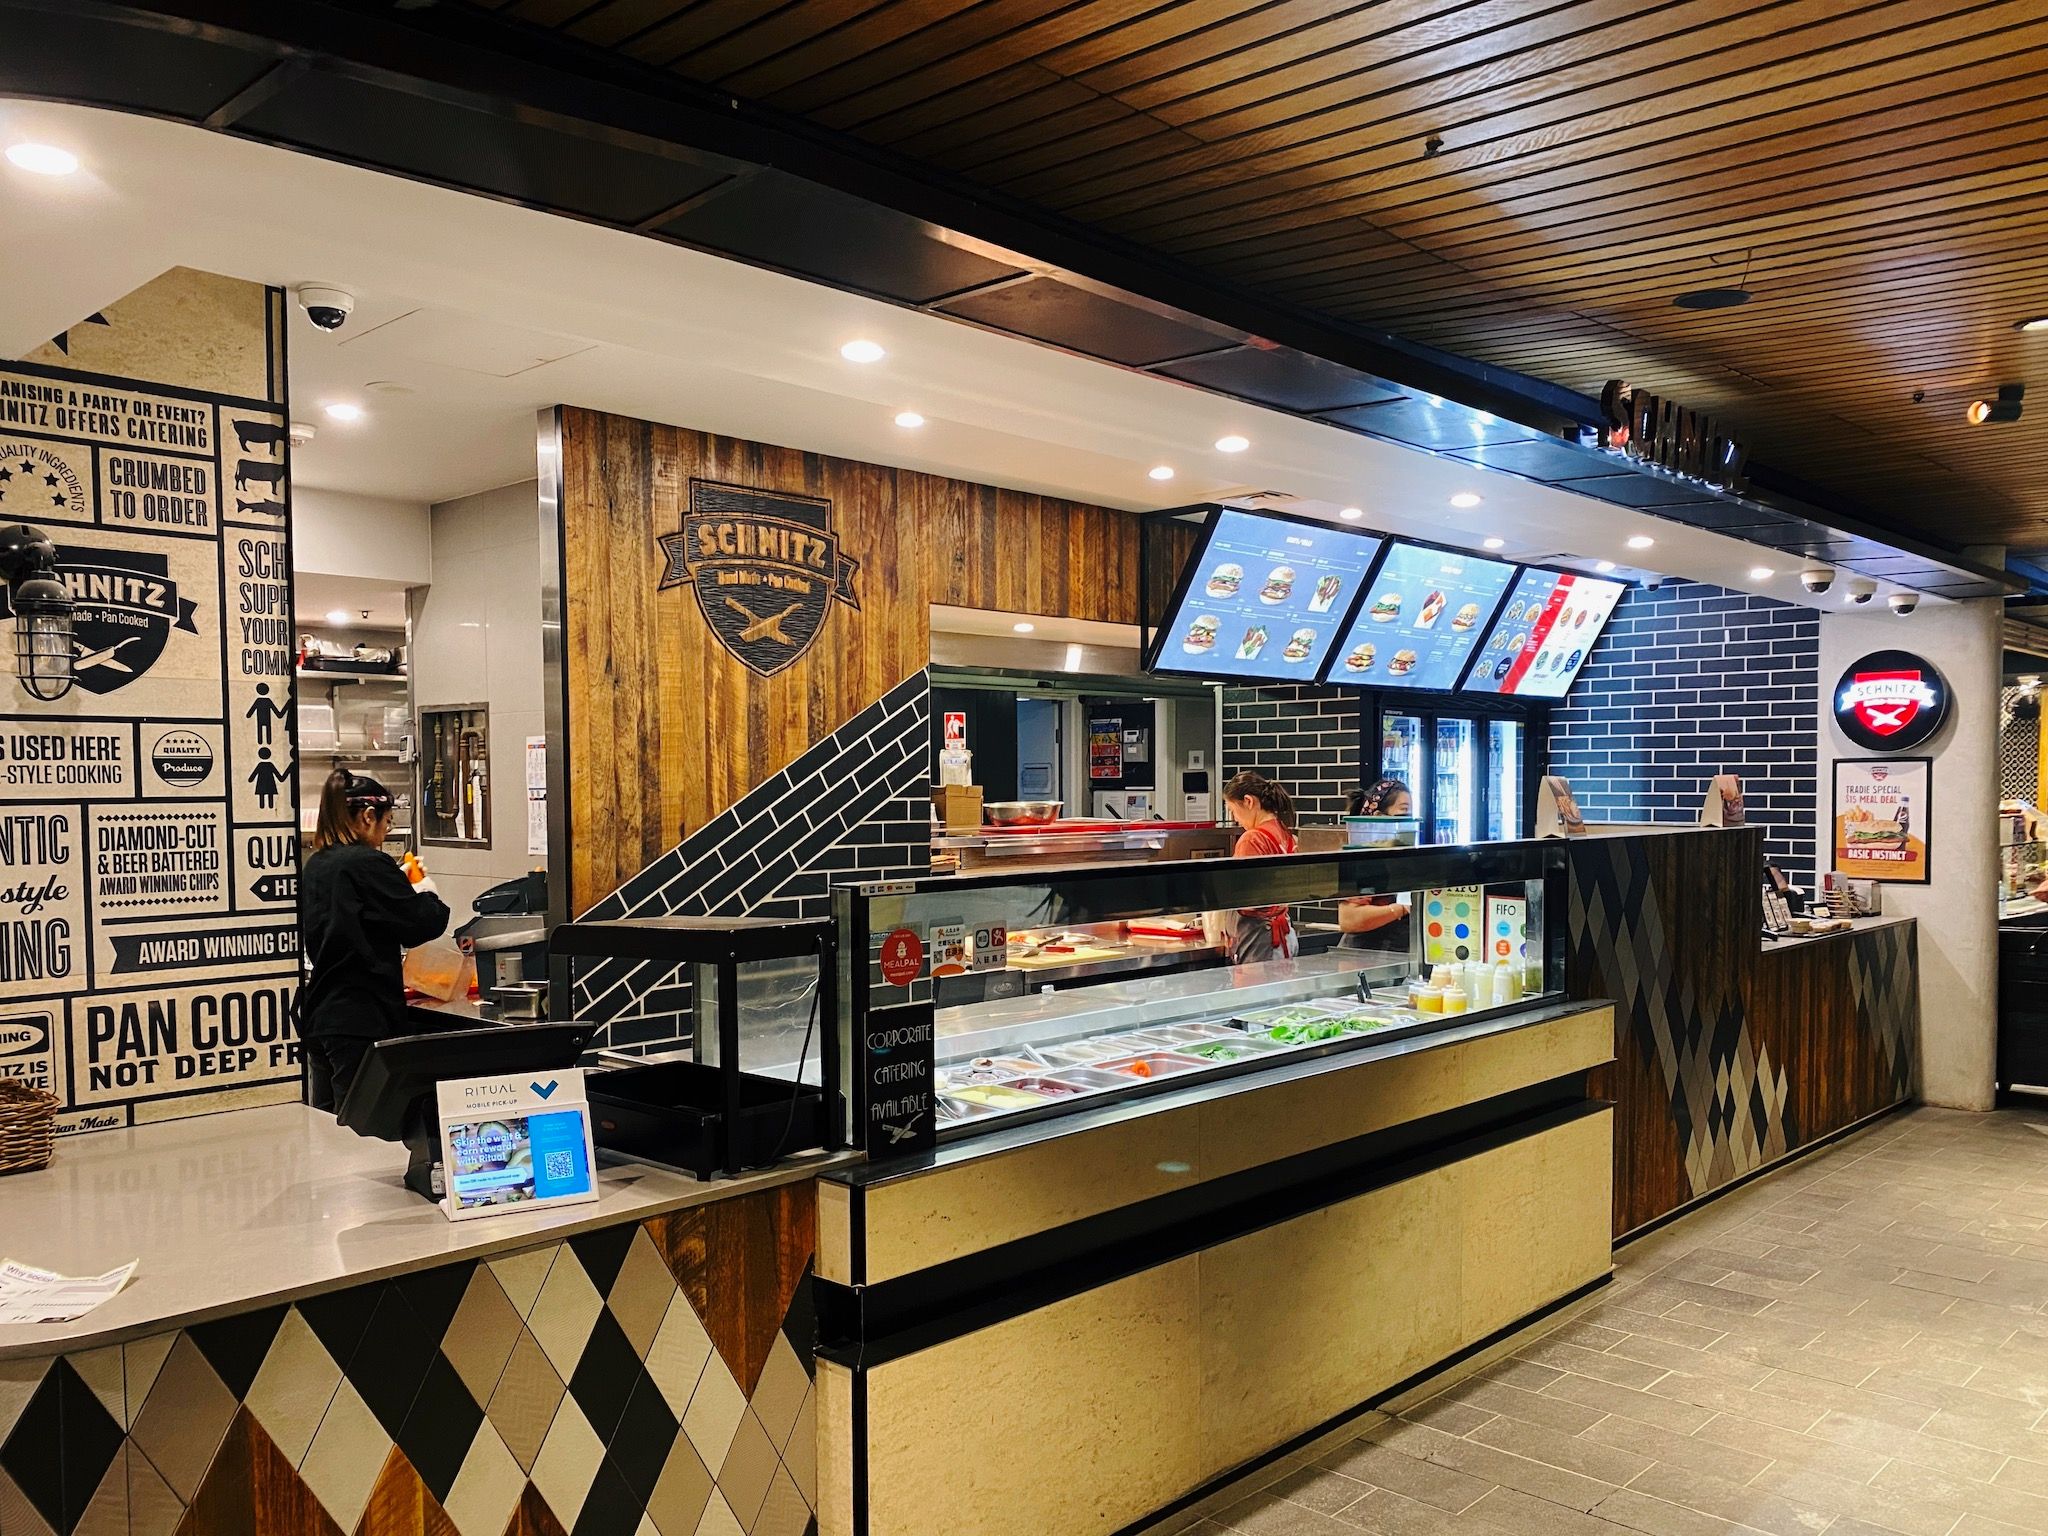 A photo of the fast food outlet Schnitz in the MLC Centre in Sydney's CBD. It's set up similar to Subway, with a salad bar-type setup at the front where they prepare the wrap or roll, and a kitchen in the back where the schnitzel is cooked. There's nobody else waiting there apart from me.